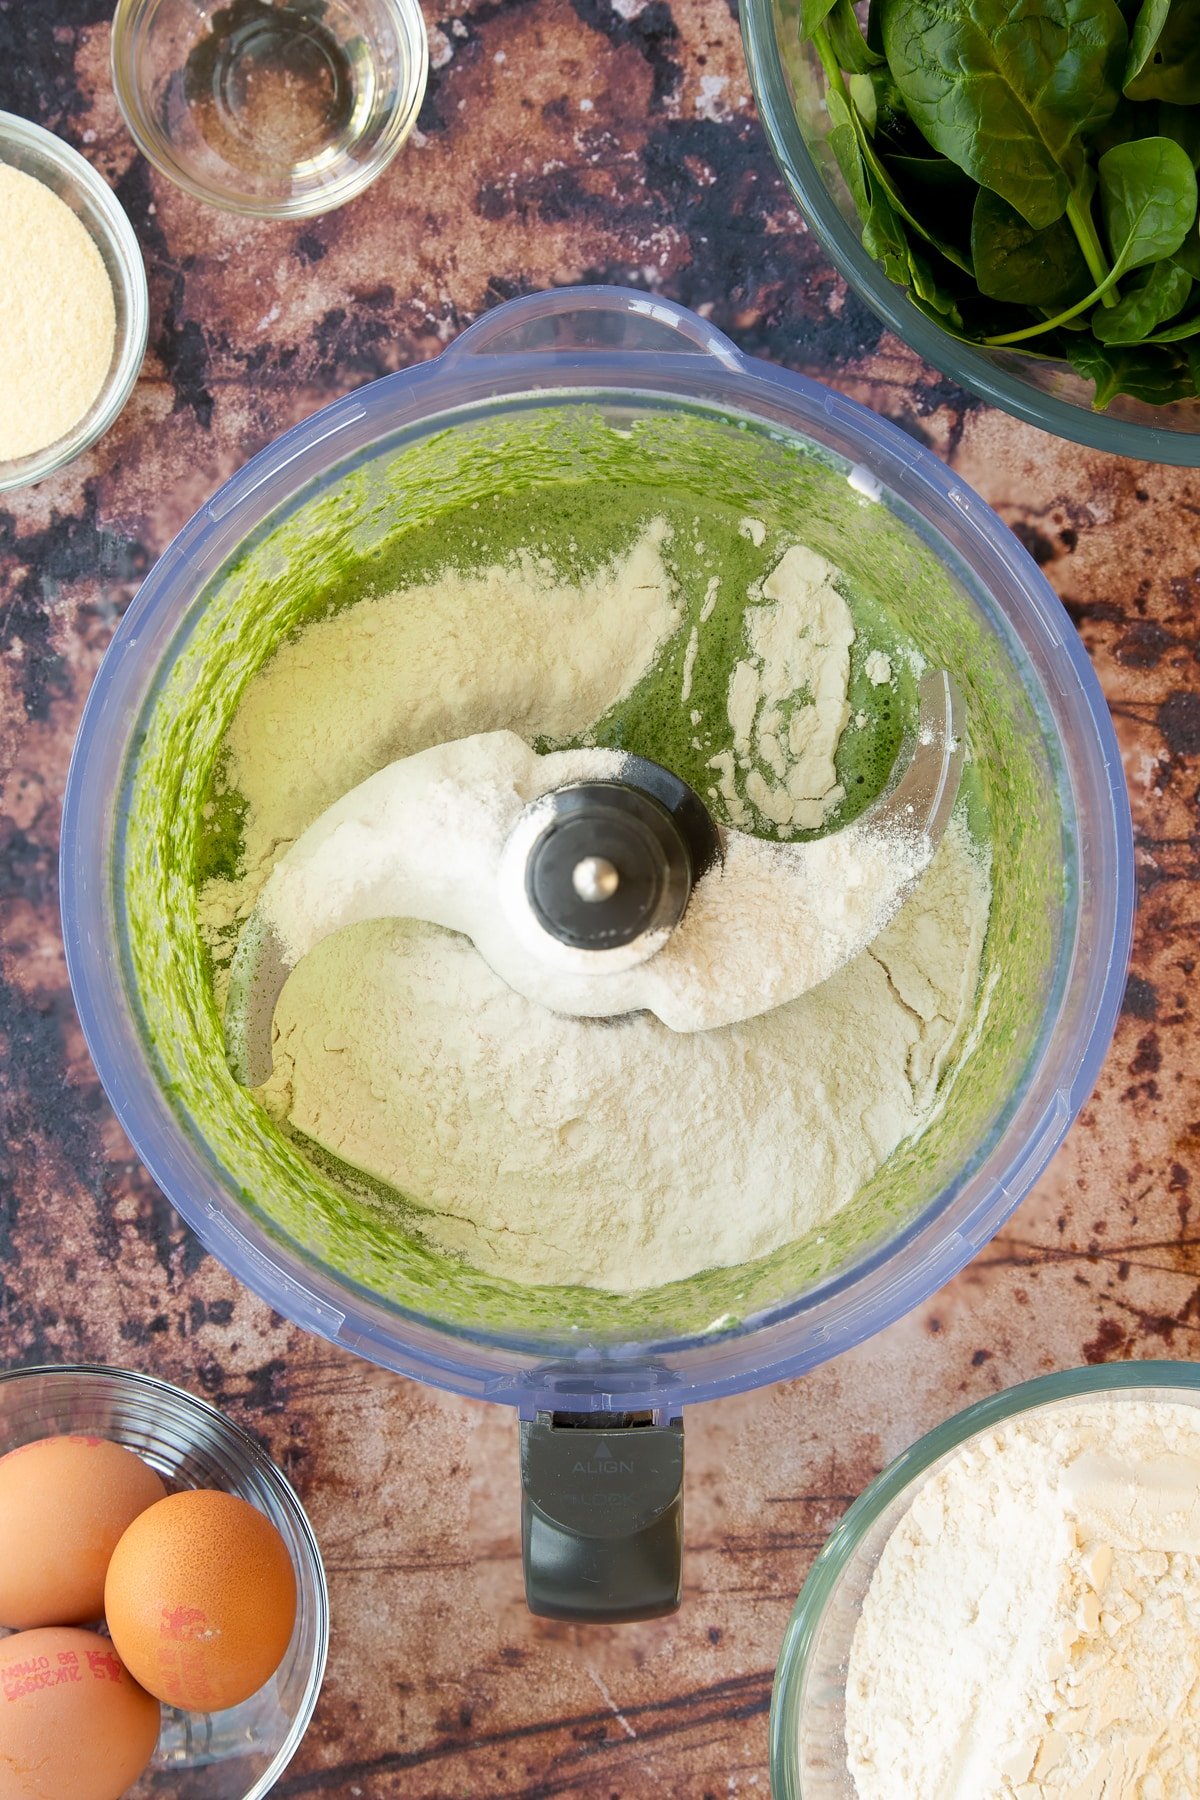 green spinach and egg mixture topped with flour in a food processor.